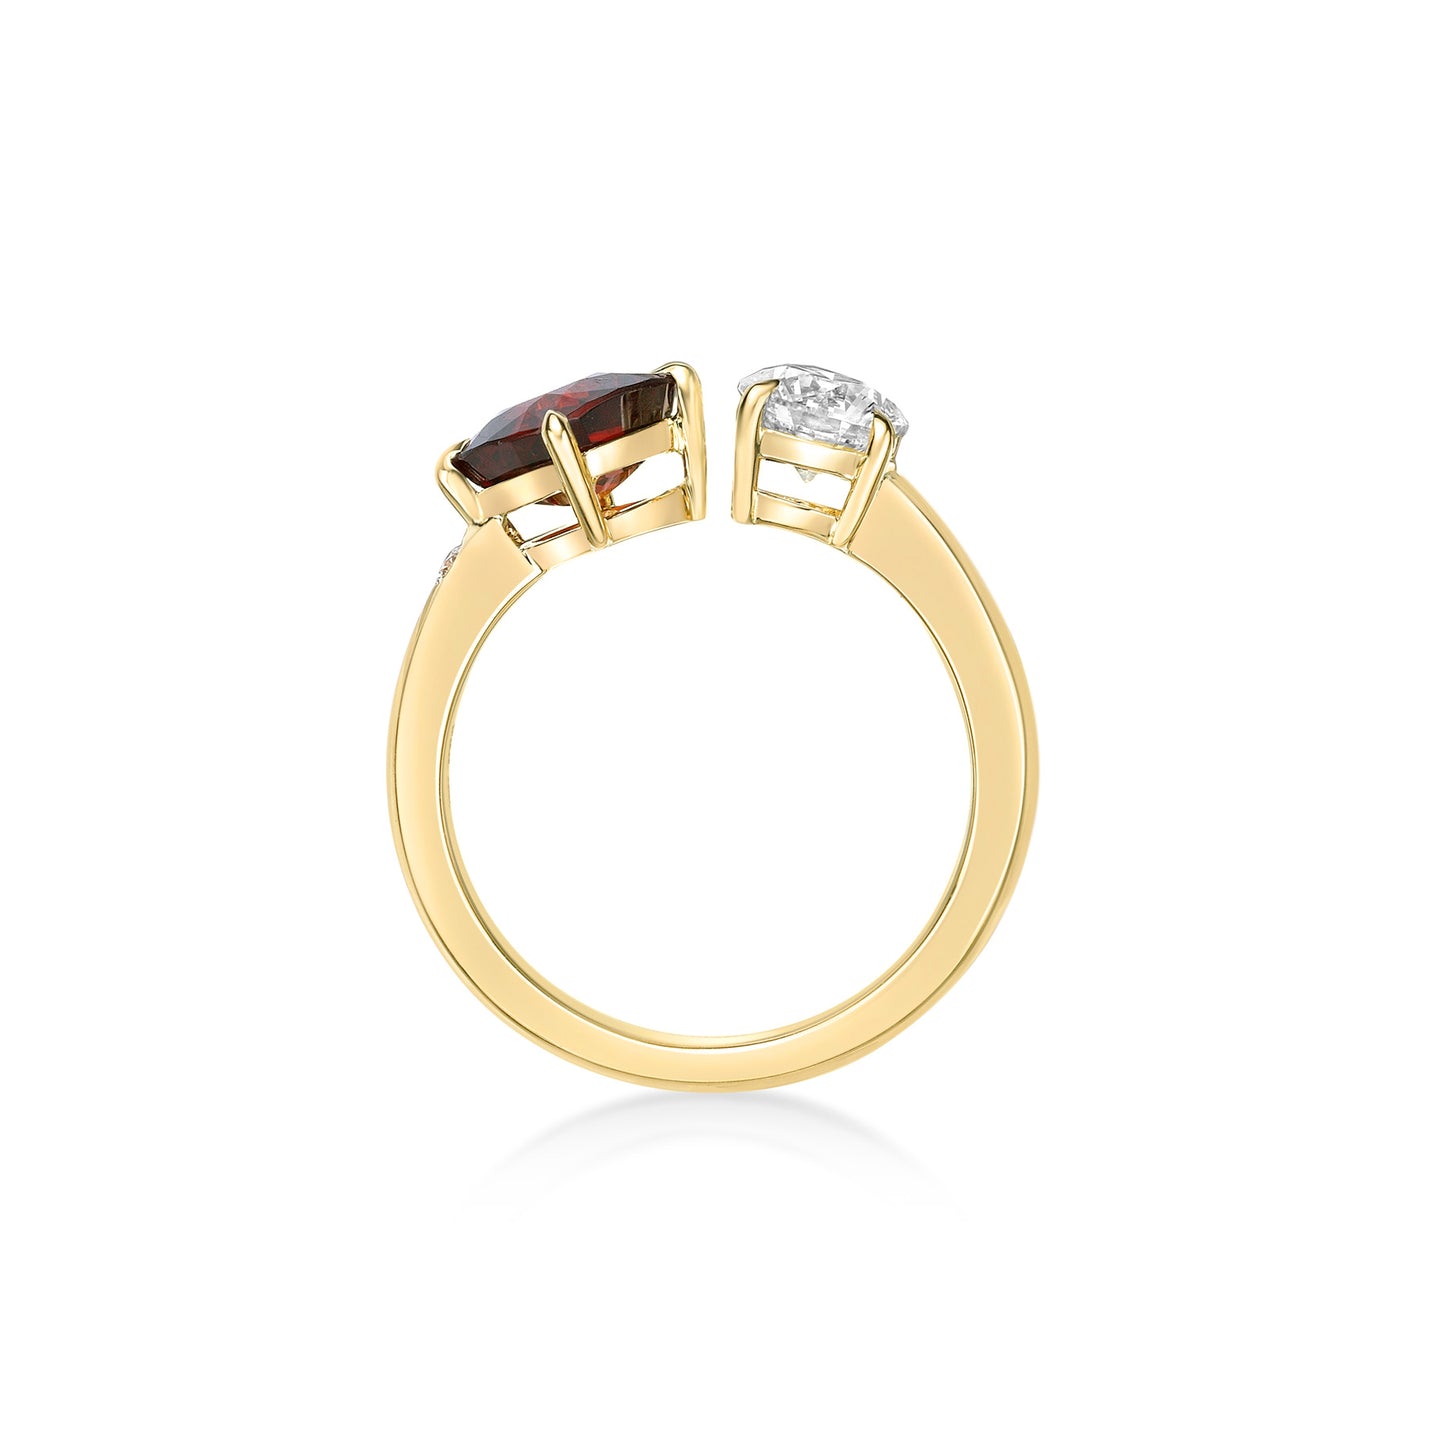 Bespoke handmade 18K Yellow Gold mixed-shape two stone Ring with a Round Brilliant diamond and Cushion Red Garnet